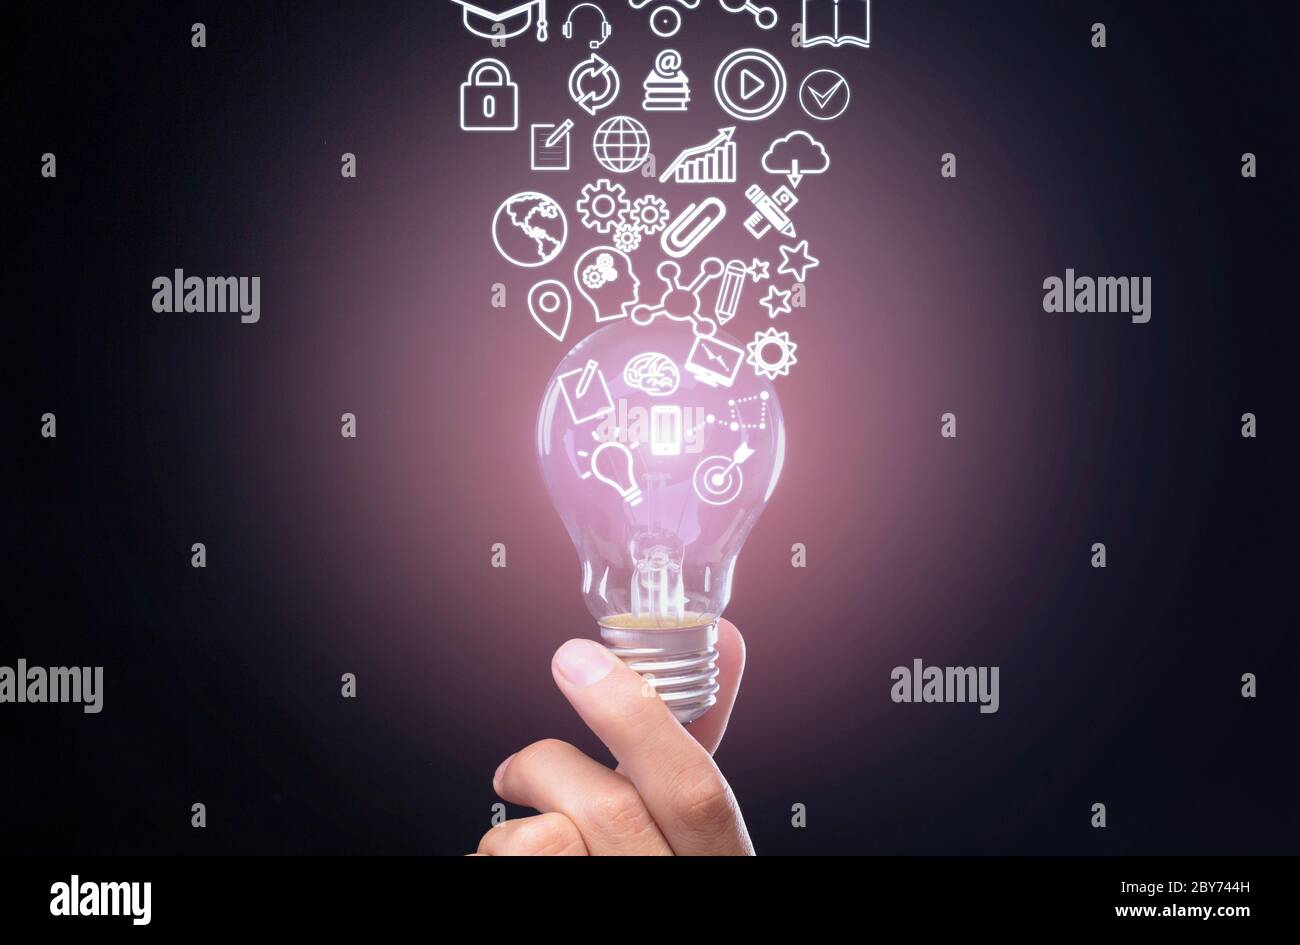 Qualification concept. Hand holds bulb, symbols knowledge, graphics and settings flow up from it Stock Photo